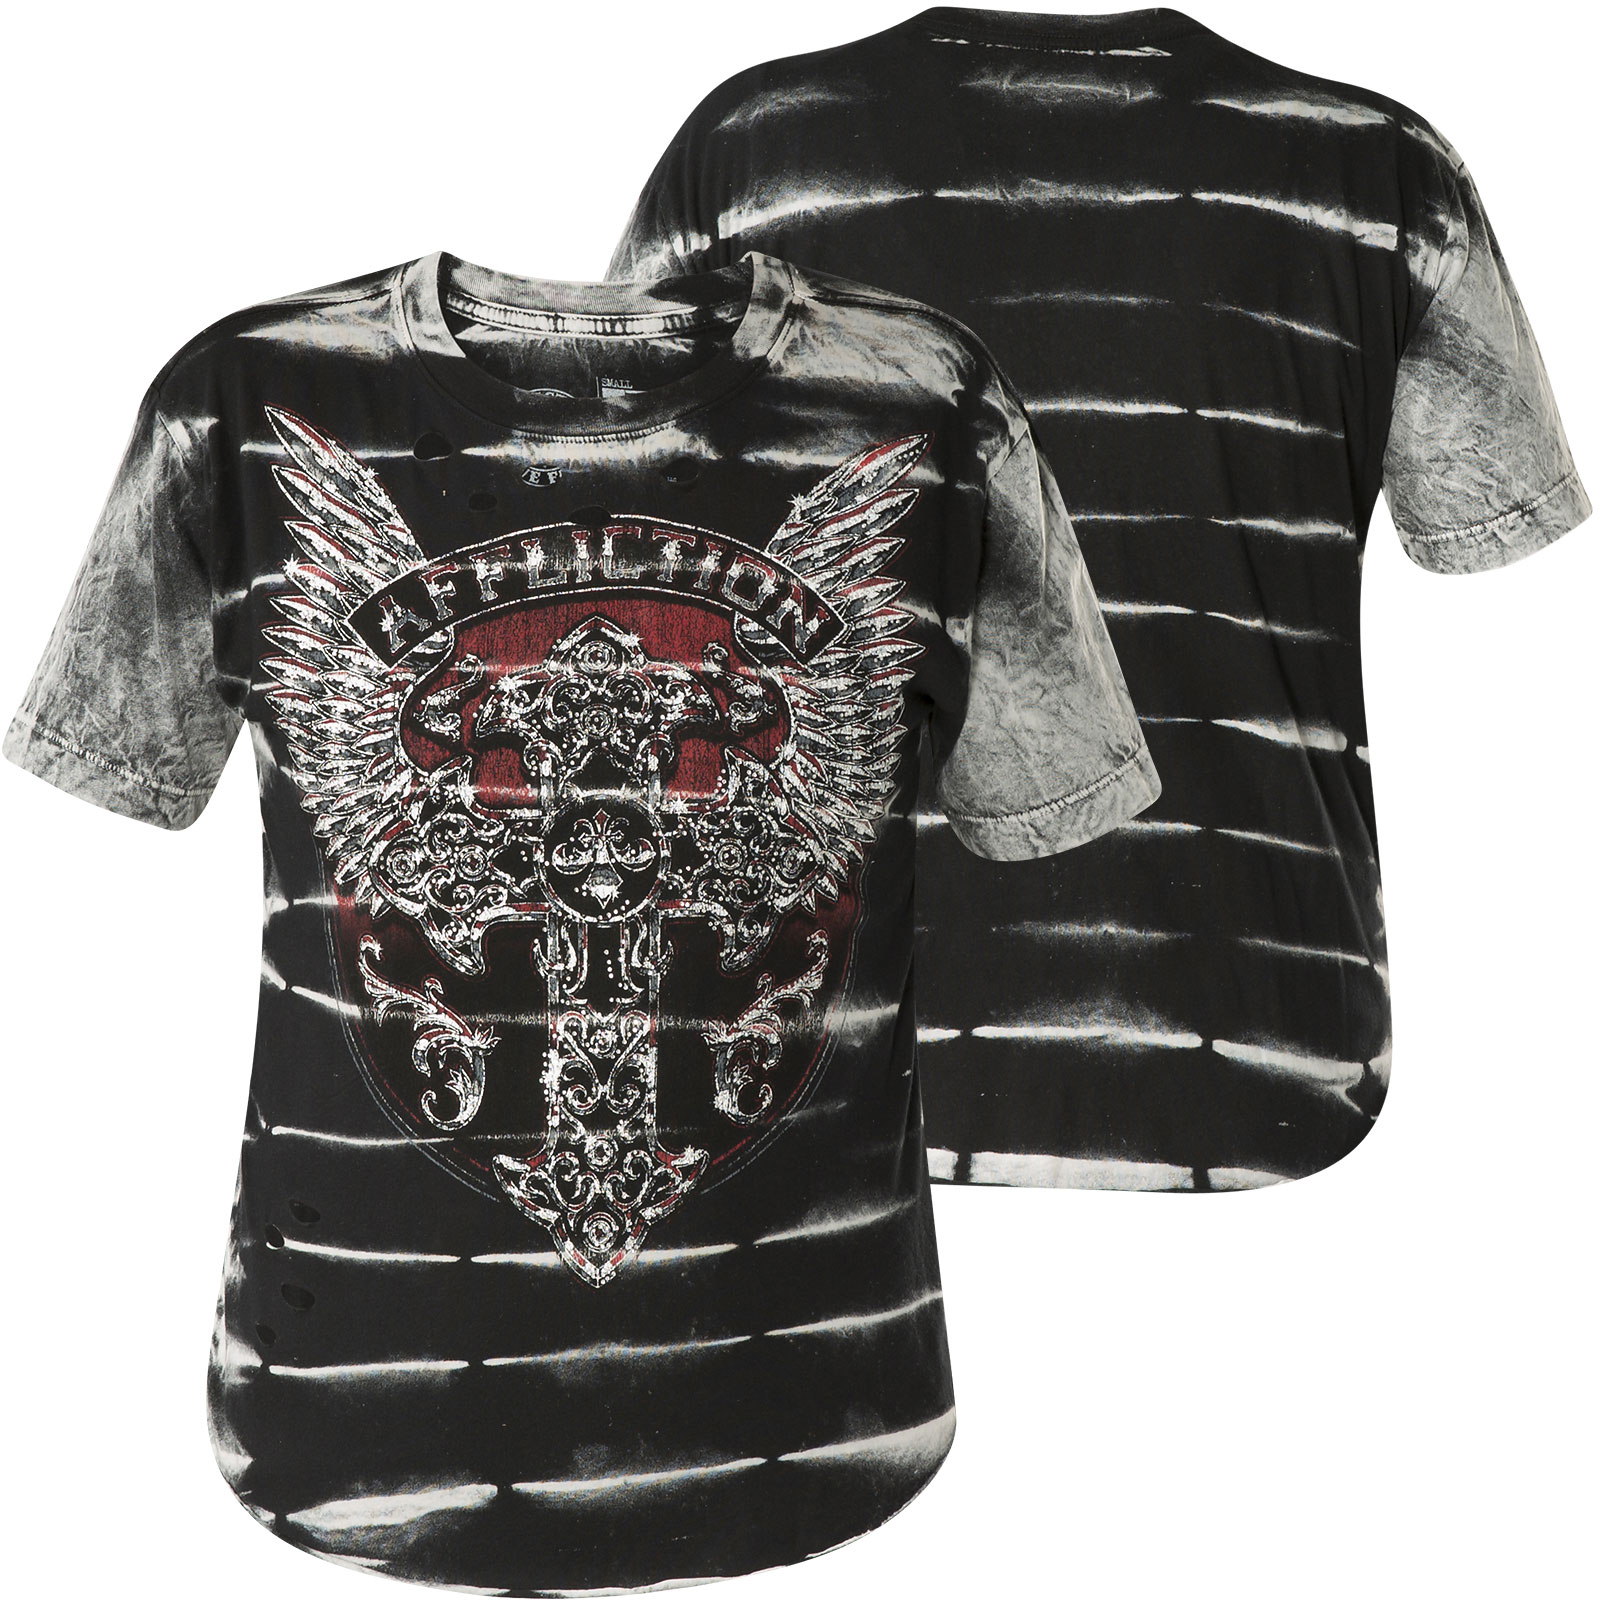 Affliction T-Shirt Congregation Chrome featuring large wings and lettering